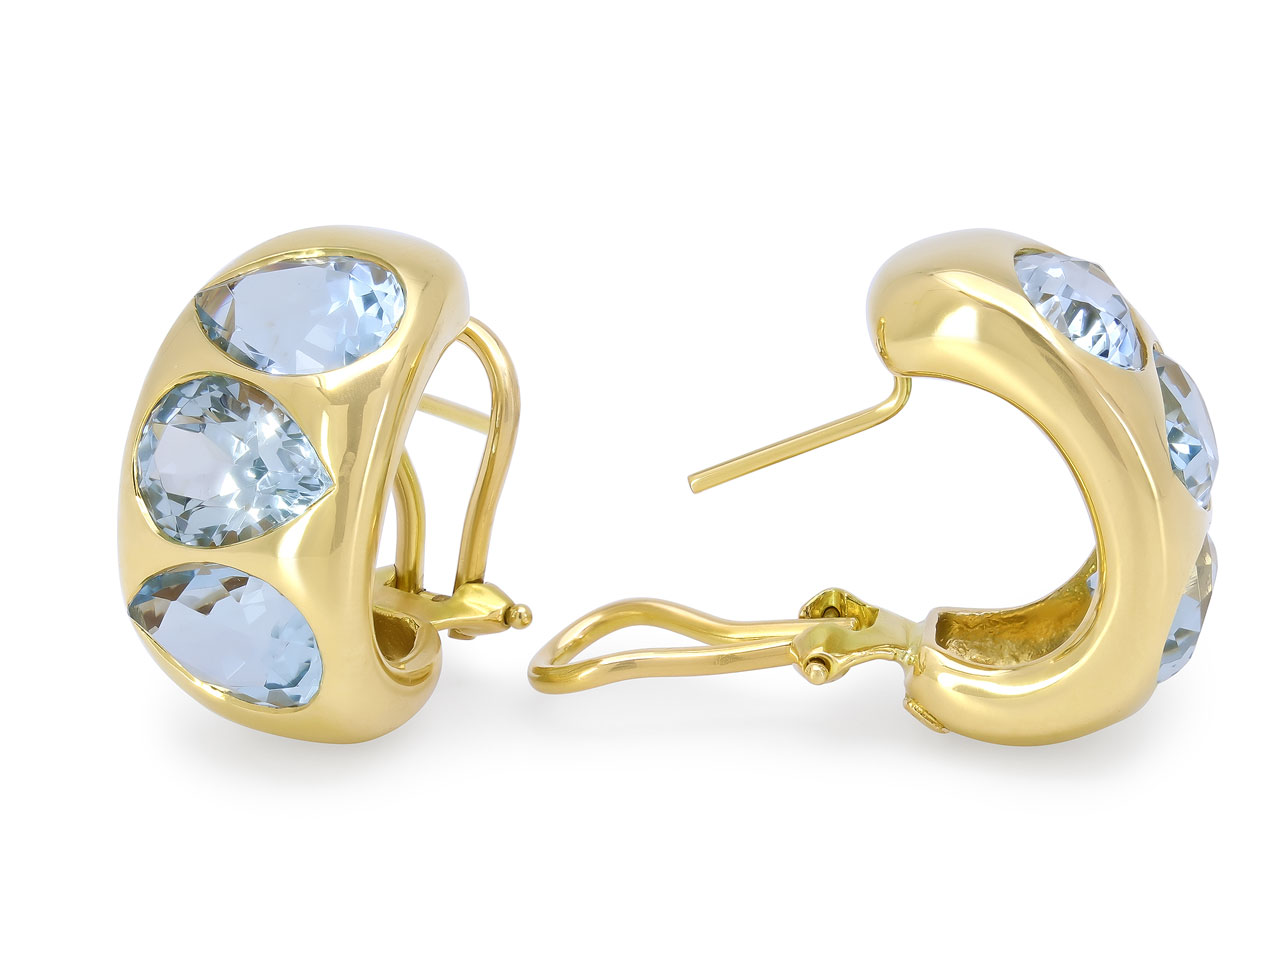 Temple St. Clair Aquamarine Earrings in 18K Gold